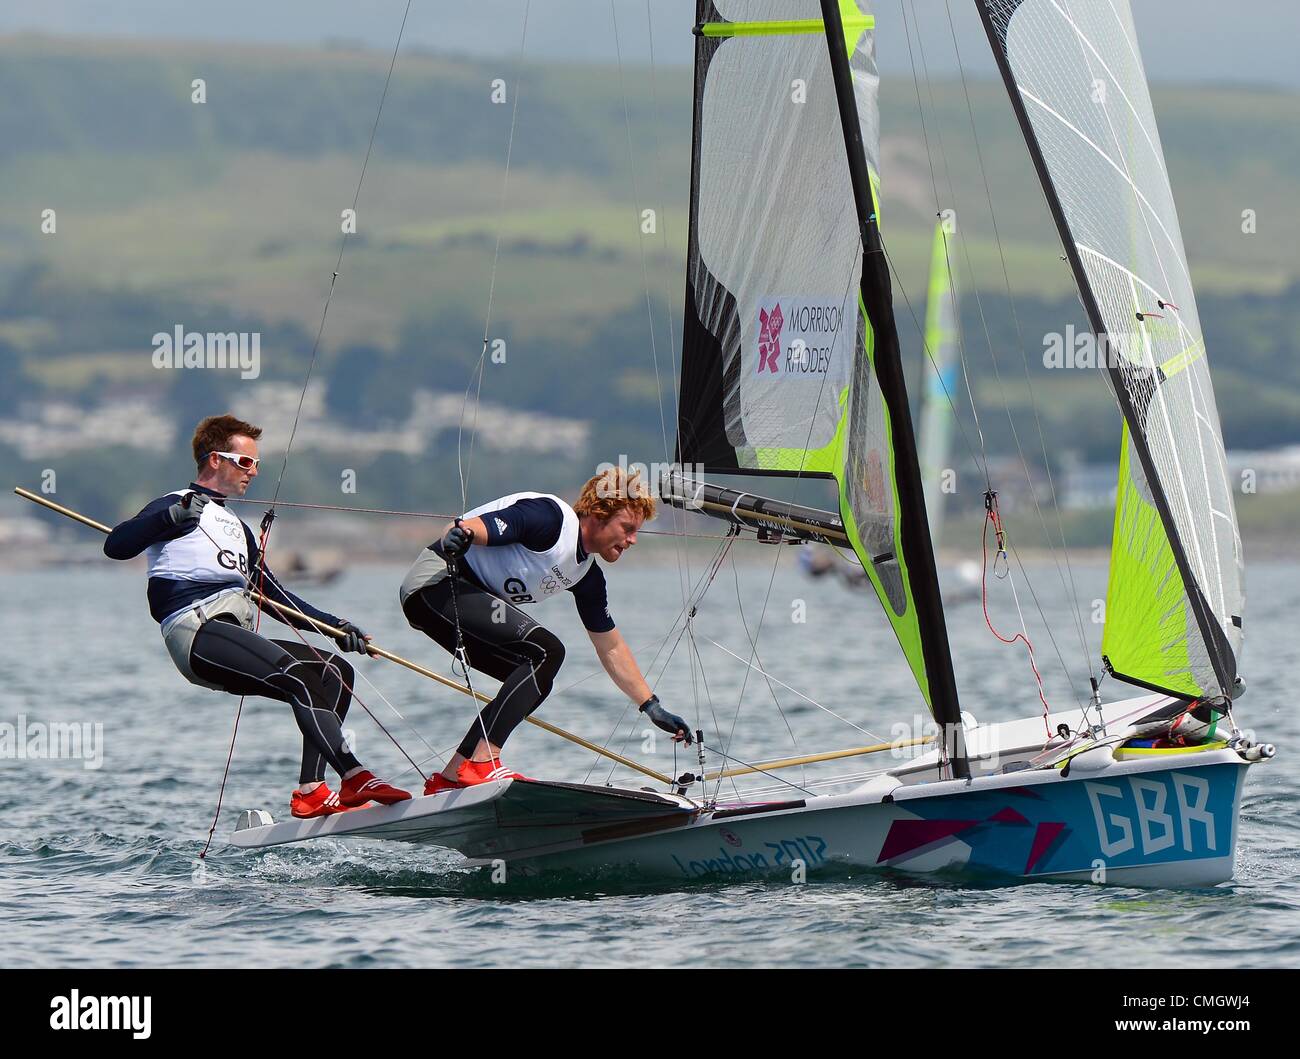 8th Aug 2012. Olympic Sailing, action during the London 2012 Olympic Games at the Weymouth & Portland Venue, Dorset, Britain, UK.  Steve Morrison and Ben Rhodes of Great Britain in the 49er Men's skiff medal race August 8th, 2012 PICTURE: DORSET MEDIA SERVICE Stock Photo